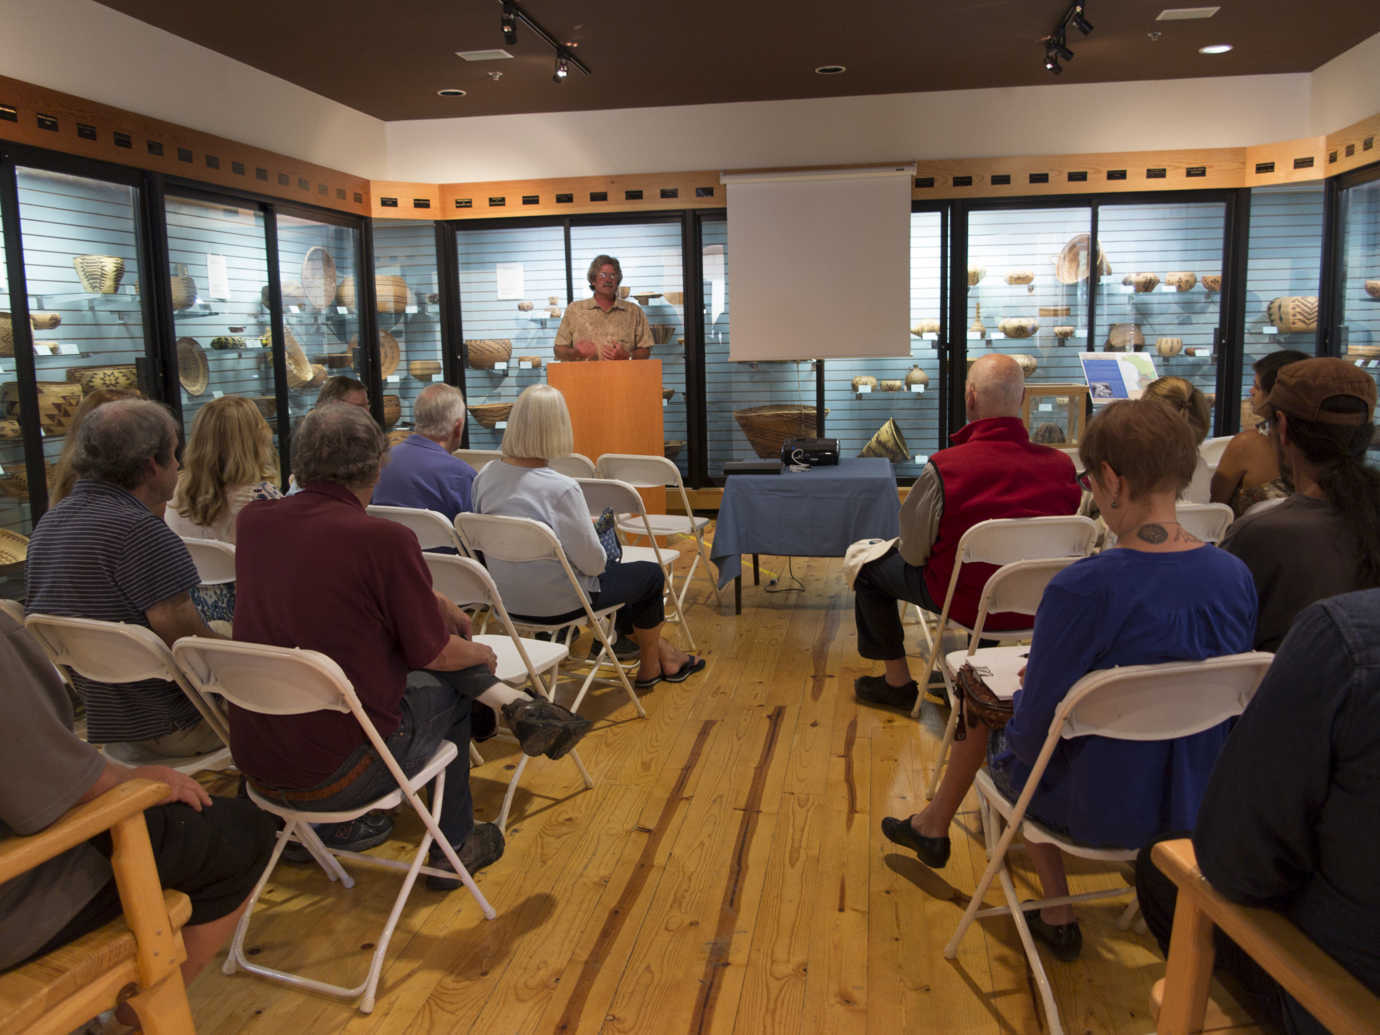 NLTHS Board President Jim Phelan speaking at the Gatekeeper’s Museum for the North Lake Tahoe Digitization Day on June 26, 2016. Image courtesy of the University of Nevada, Reno.